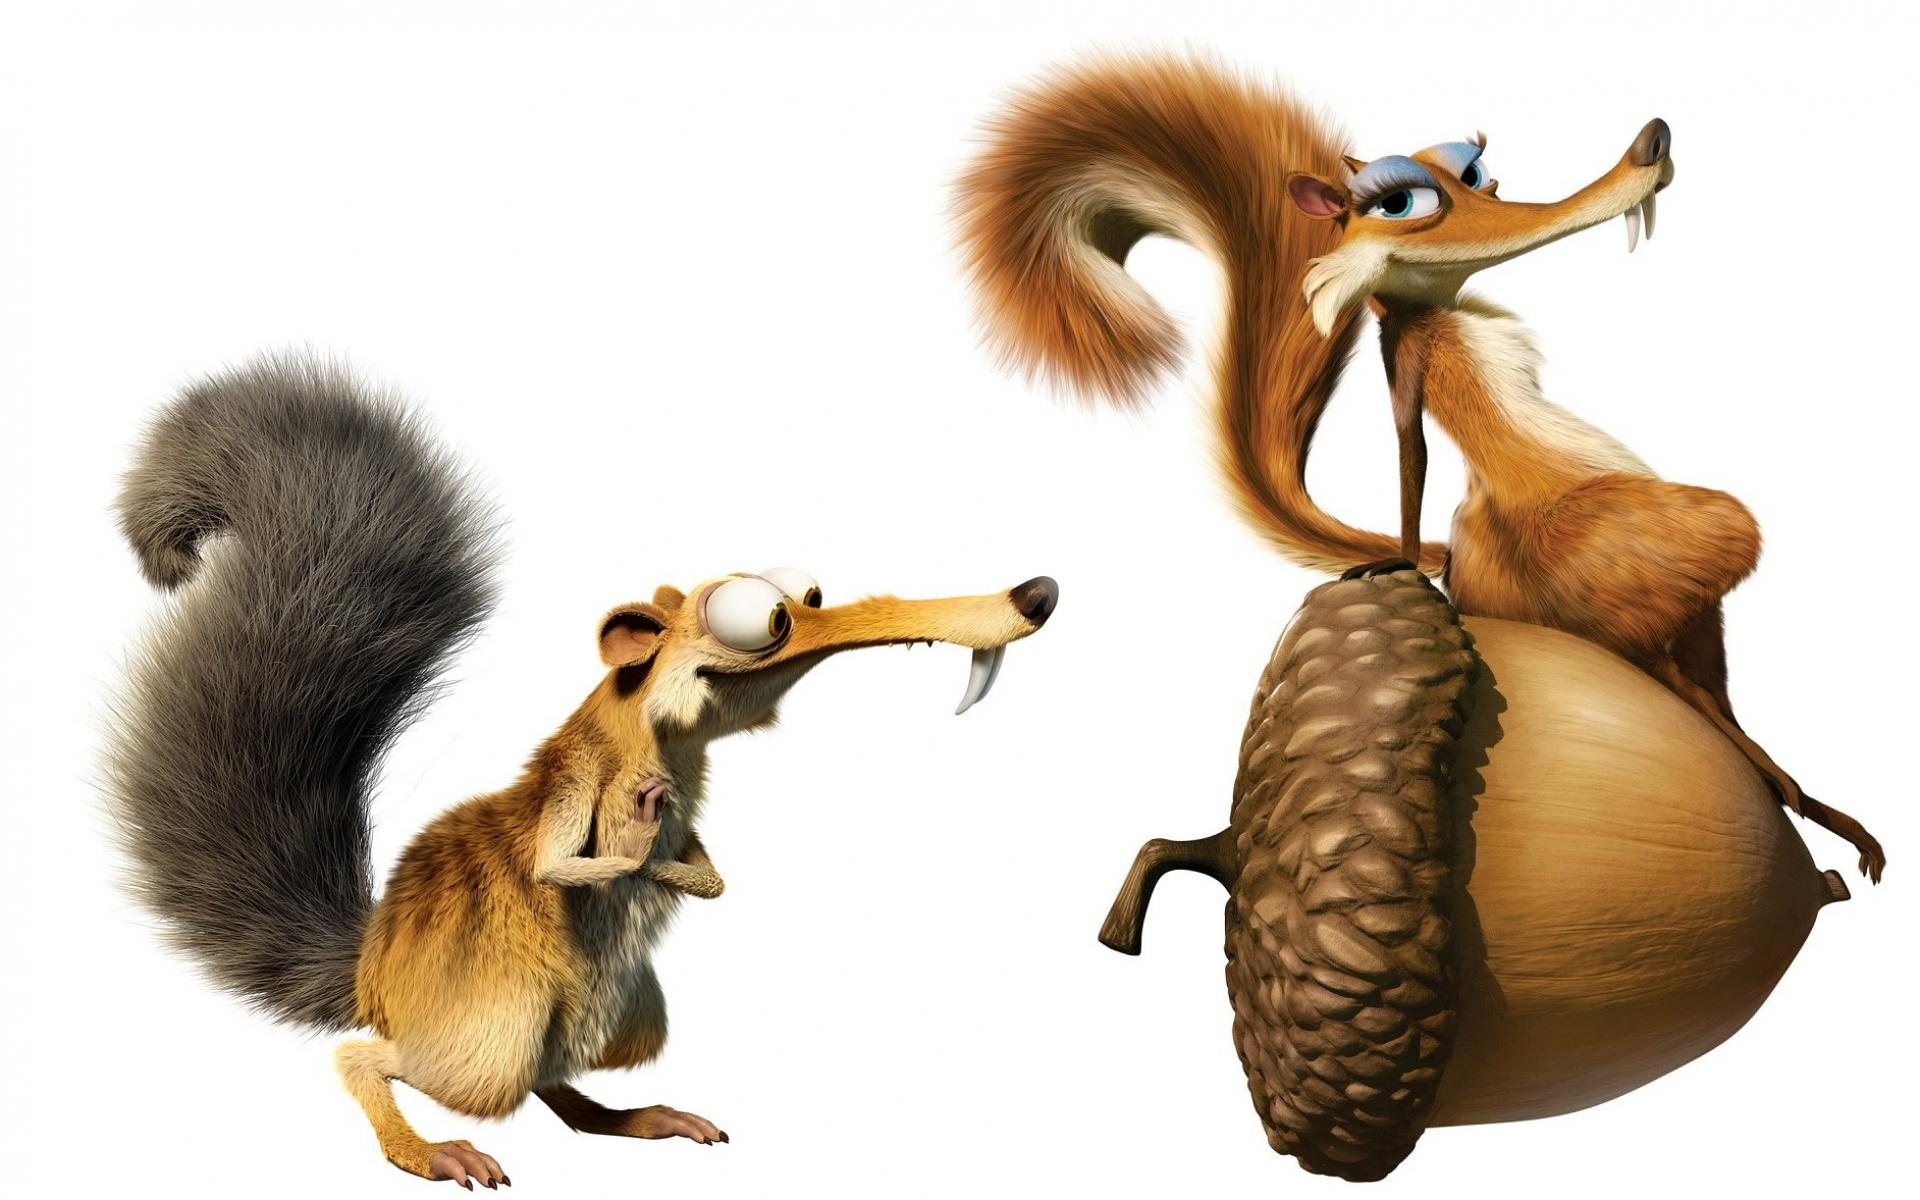 Ice Age: Dawn of the Dinosaurs Art